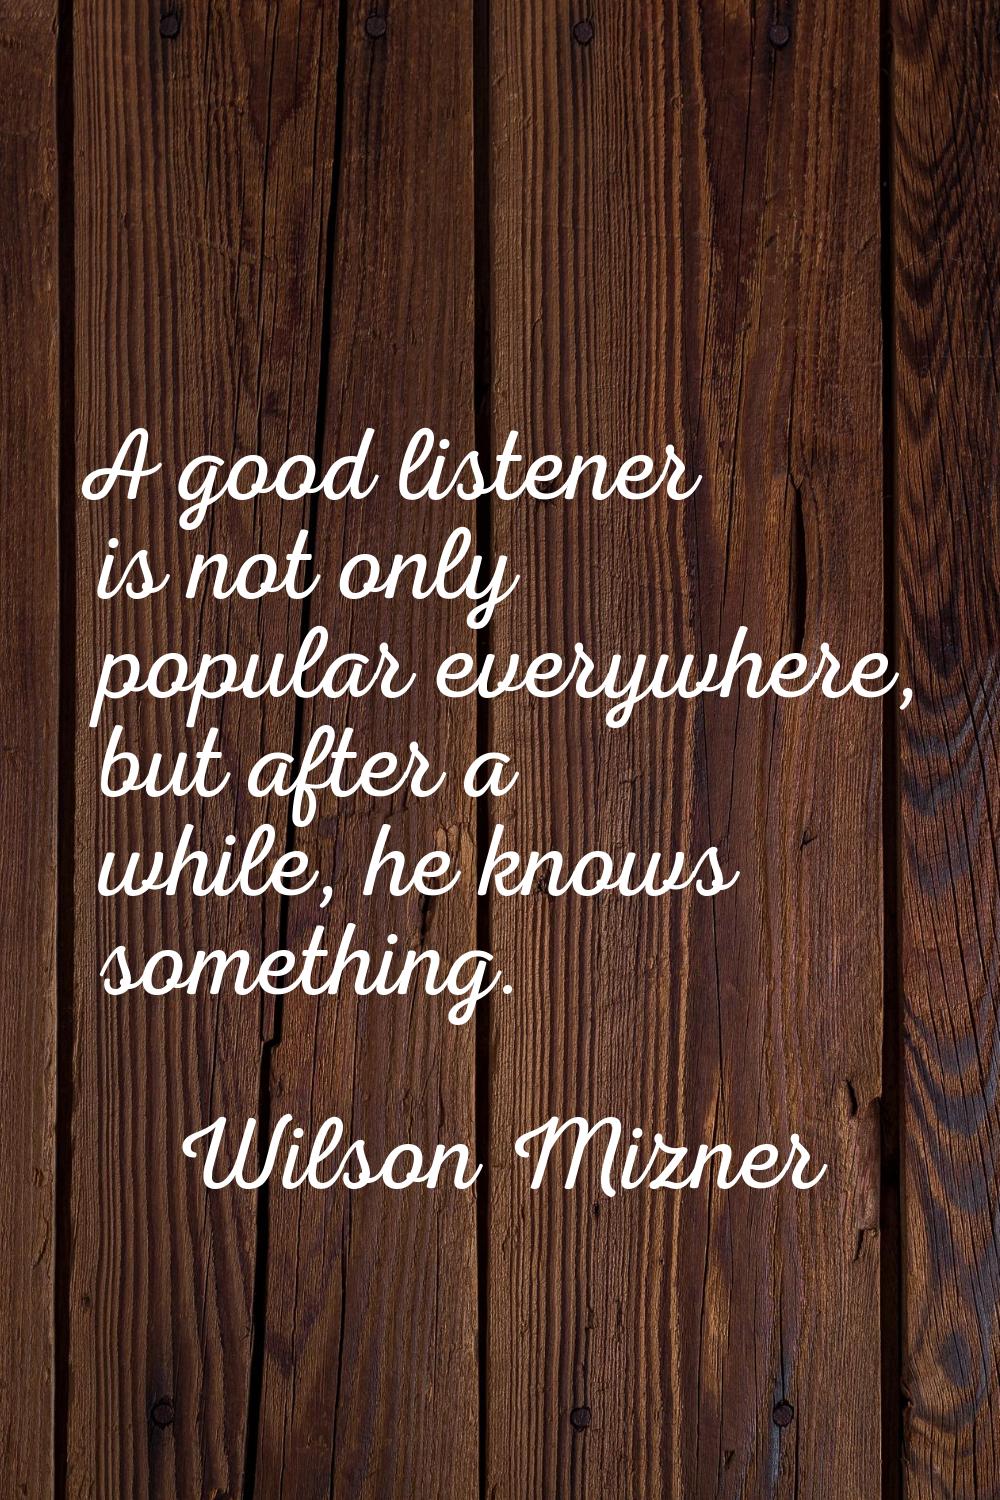 A good listener is not only popular everywhere, but after a while, he knows something.